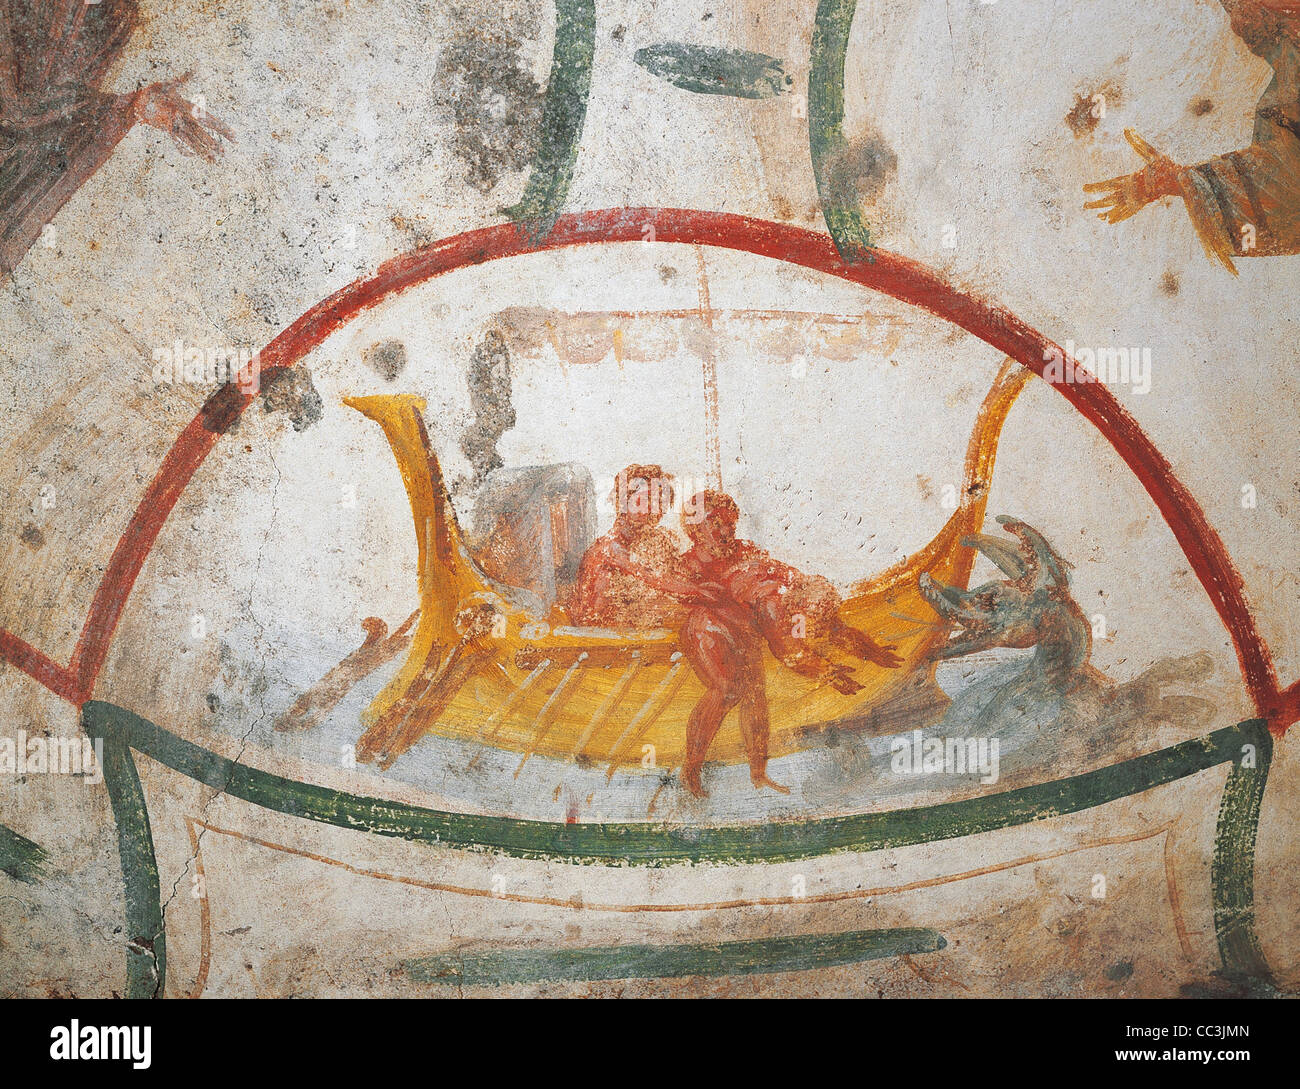 Italy - Lazio Region - Rome. Catacombs Of Saints Marcellino And Pietro, Fresco Depicting Jonah Being Thrown Out Of The Boat And Stock Photo